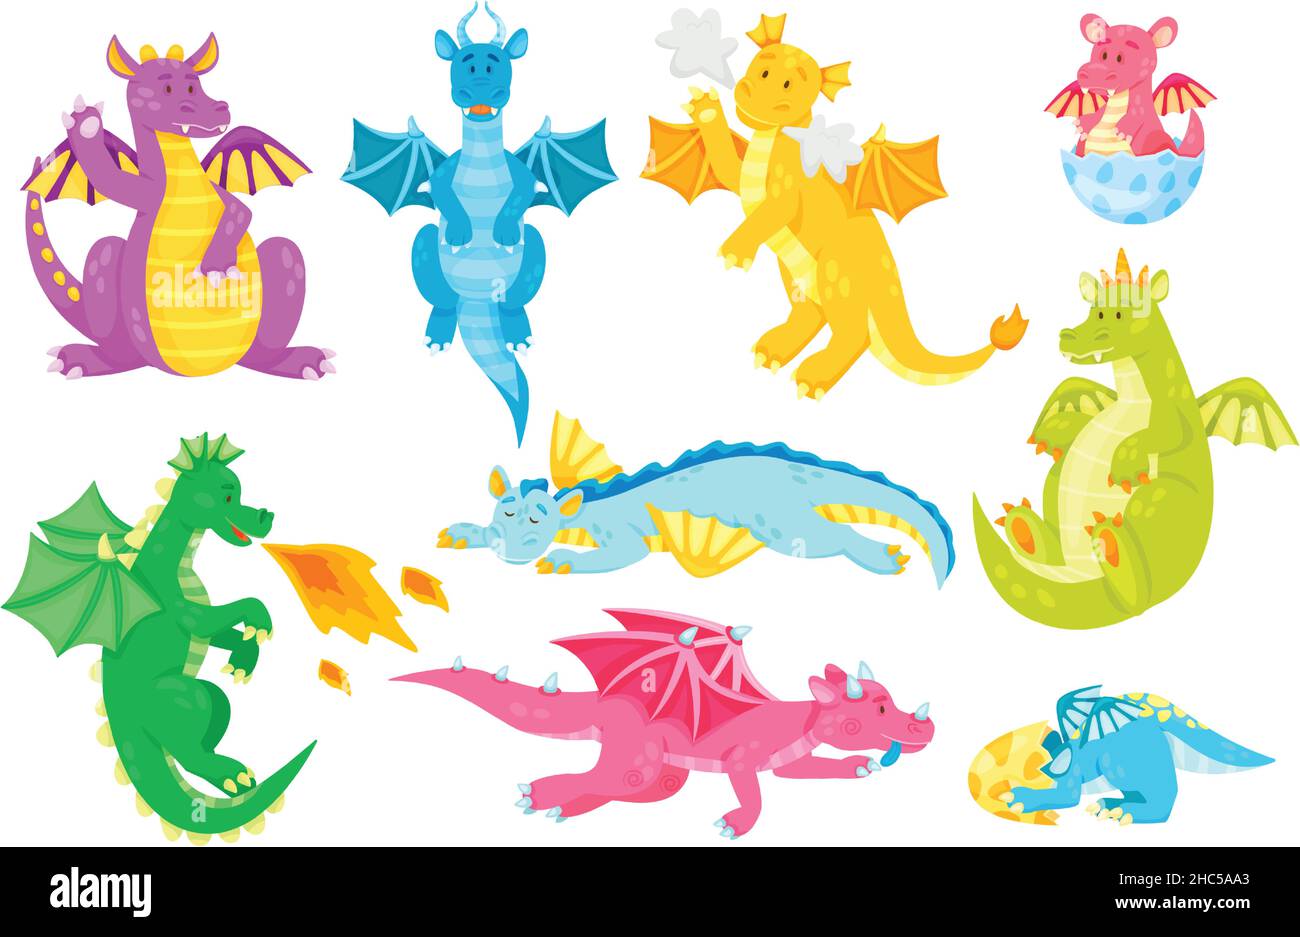 Cute Mythical Creatures Stickers, Kawaii Fantasy Characters By ArtFM